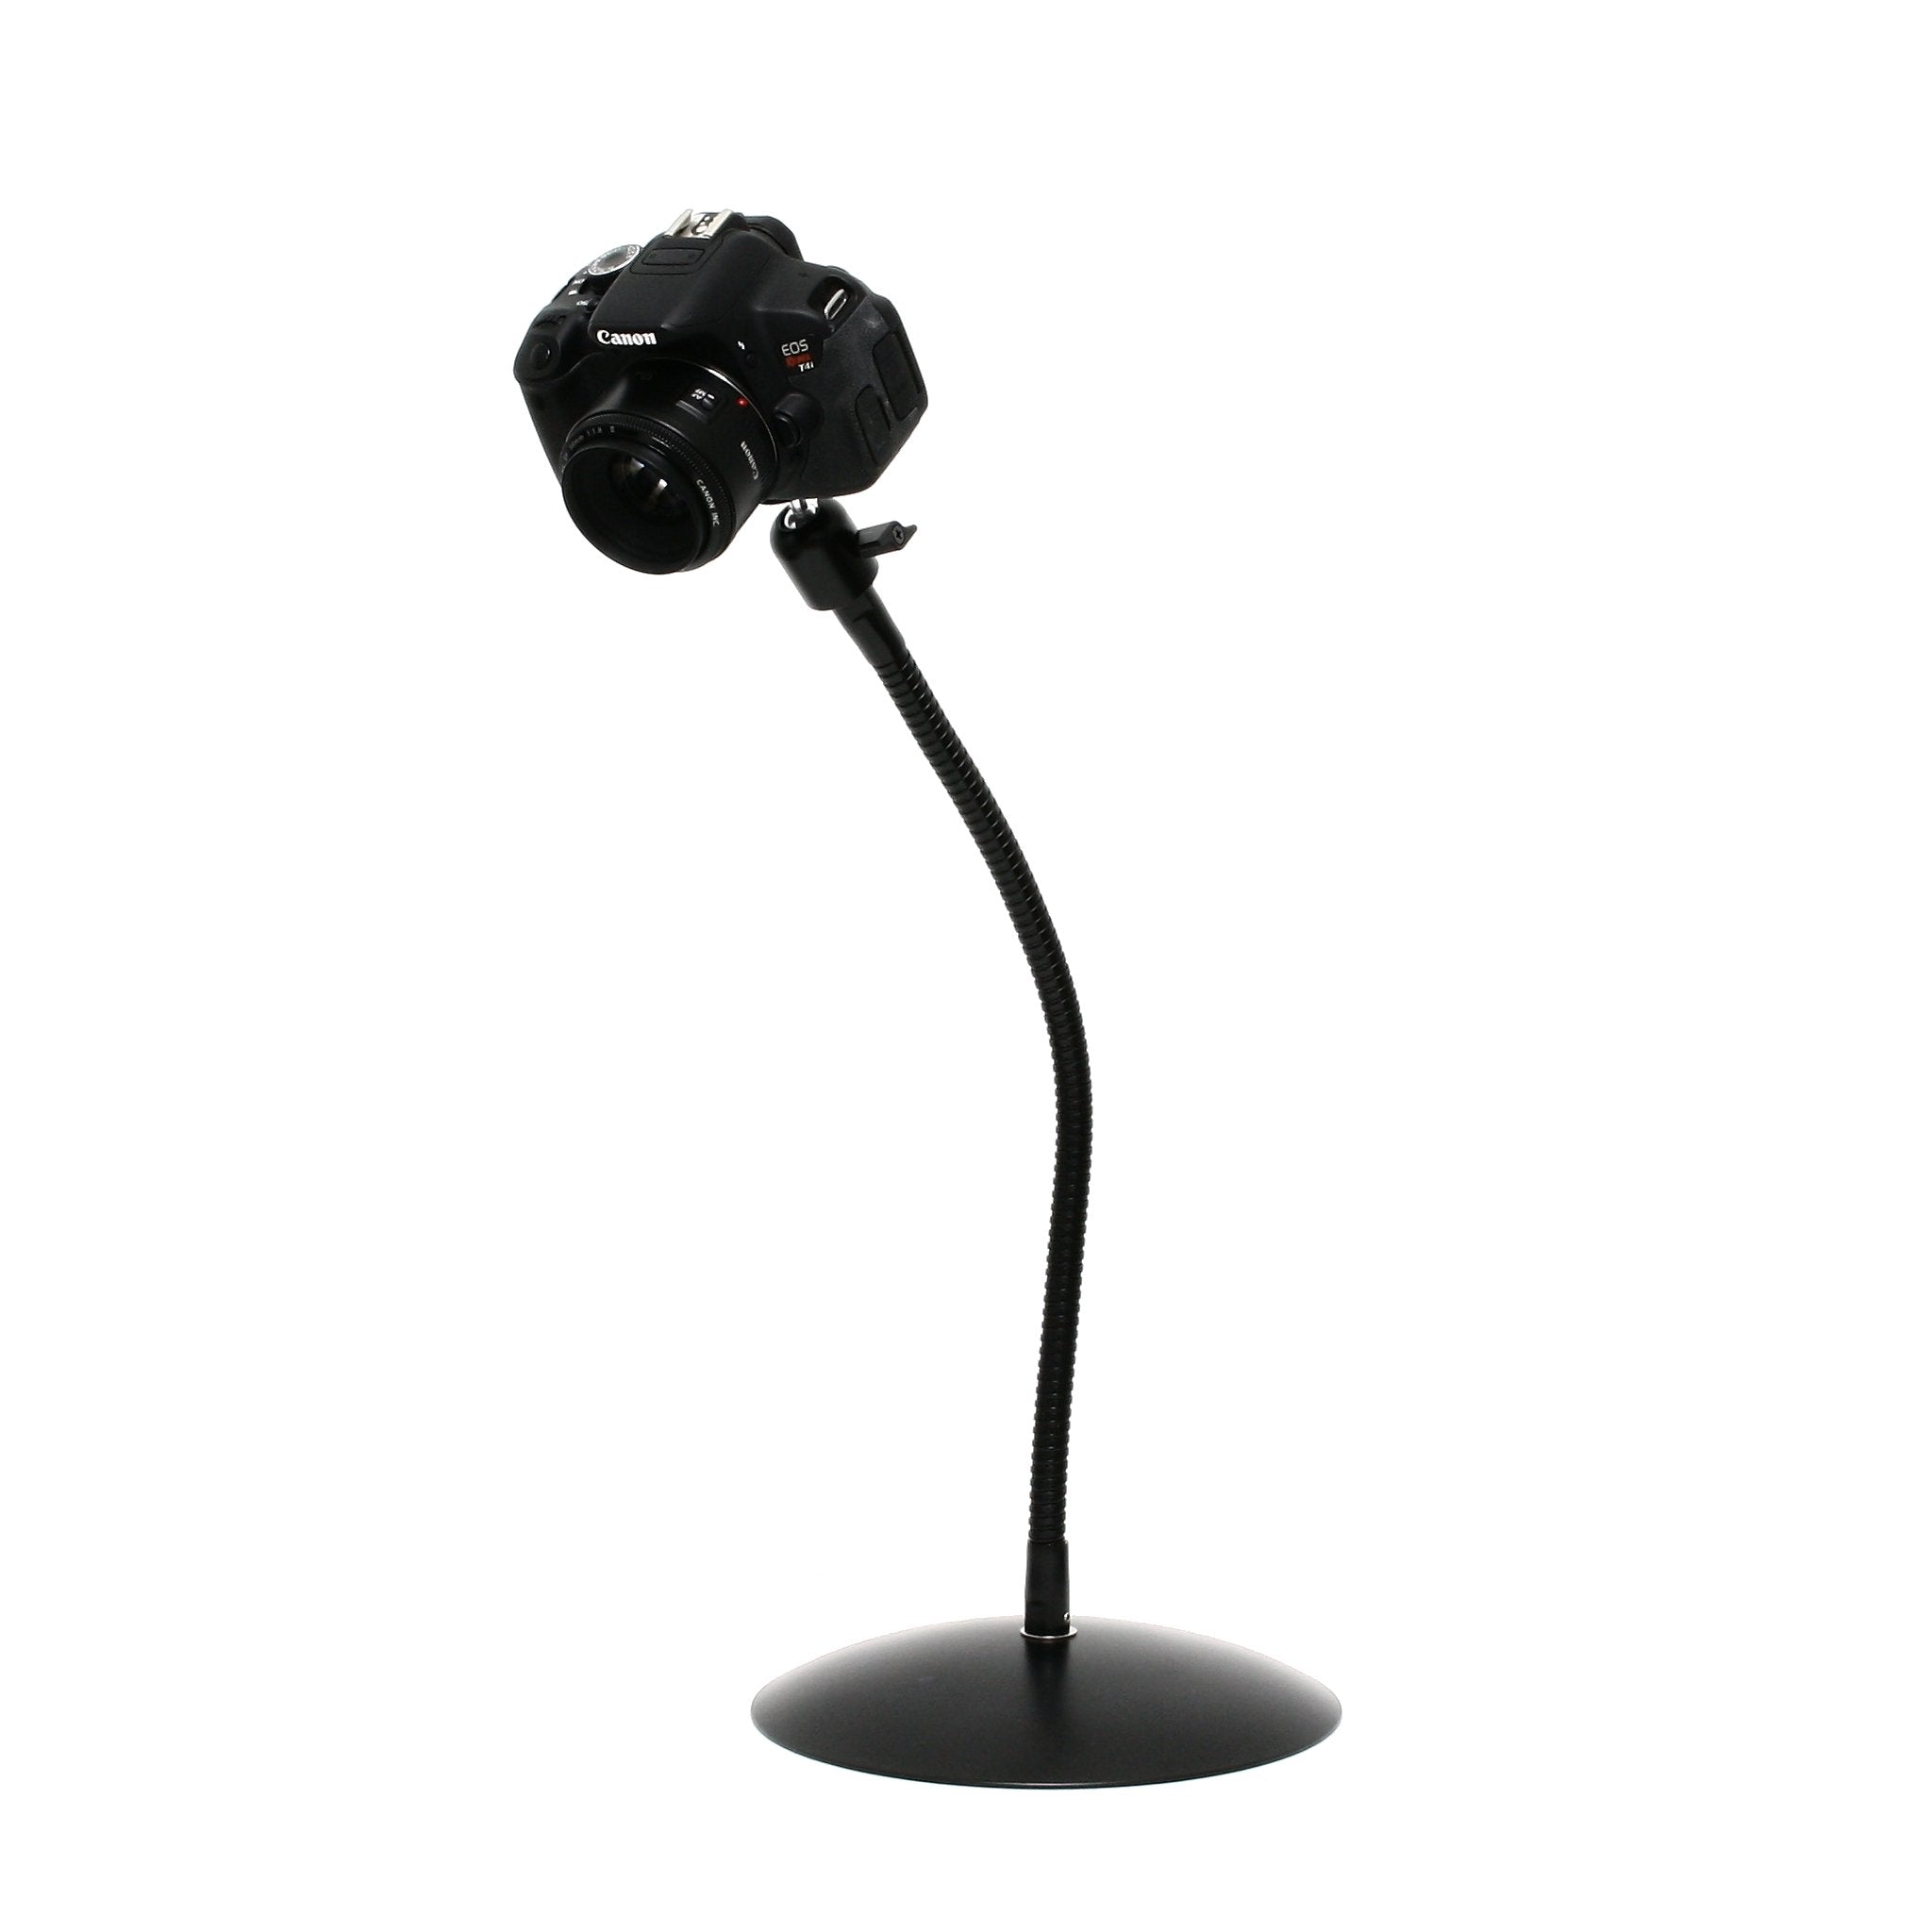 Snakeclamp 18 Heavy Duty Black Flexible Arm Camera Stand With